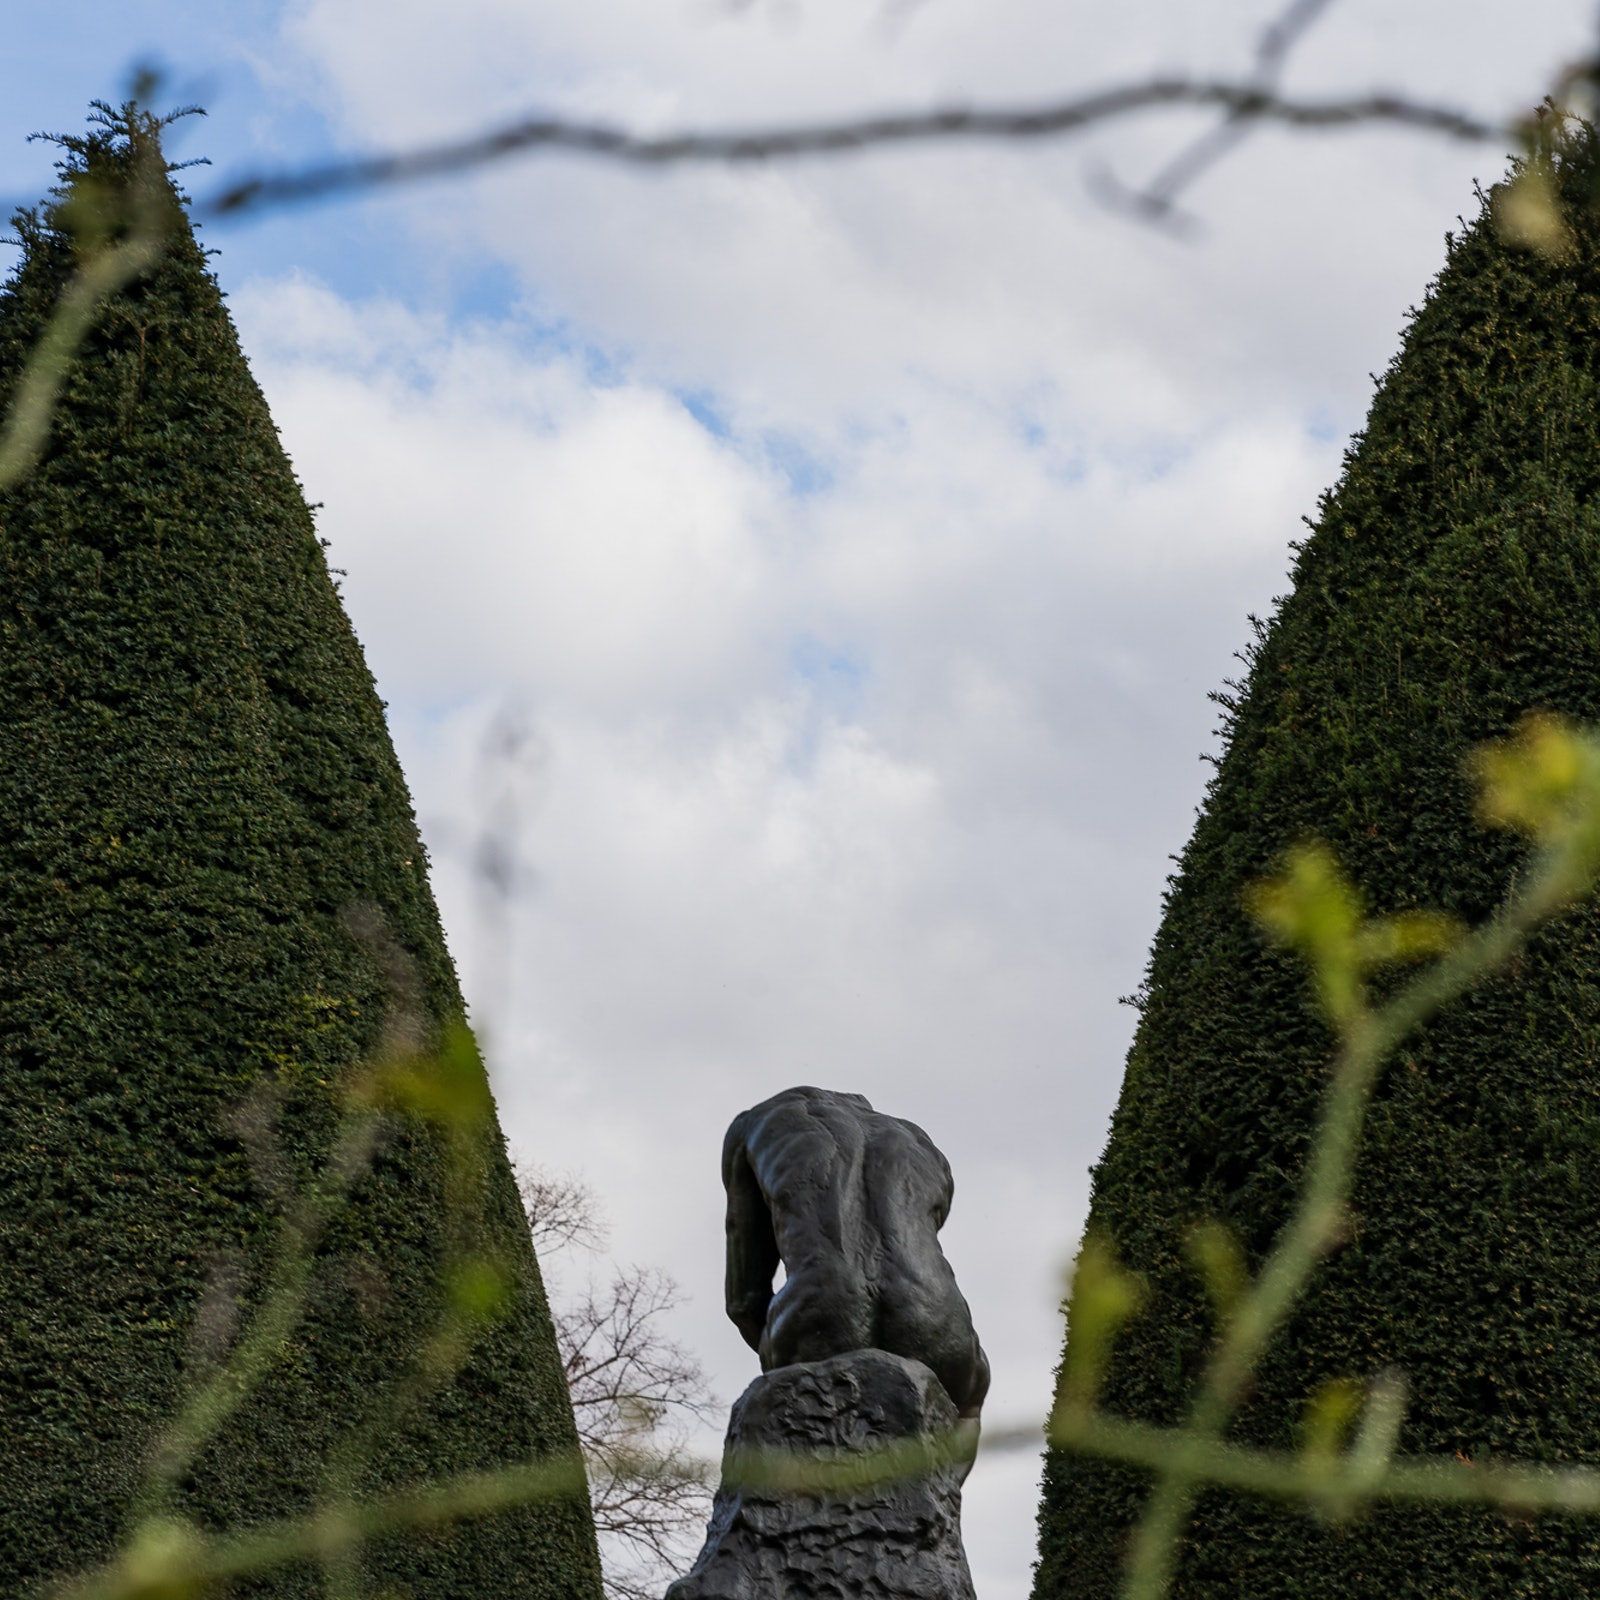 Musée Rodin: Skip The Line in France